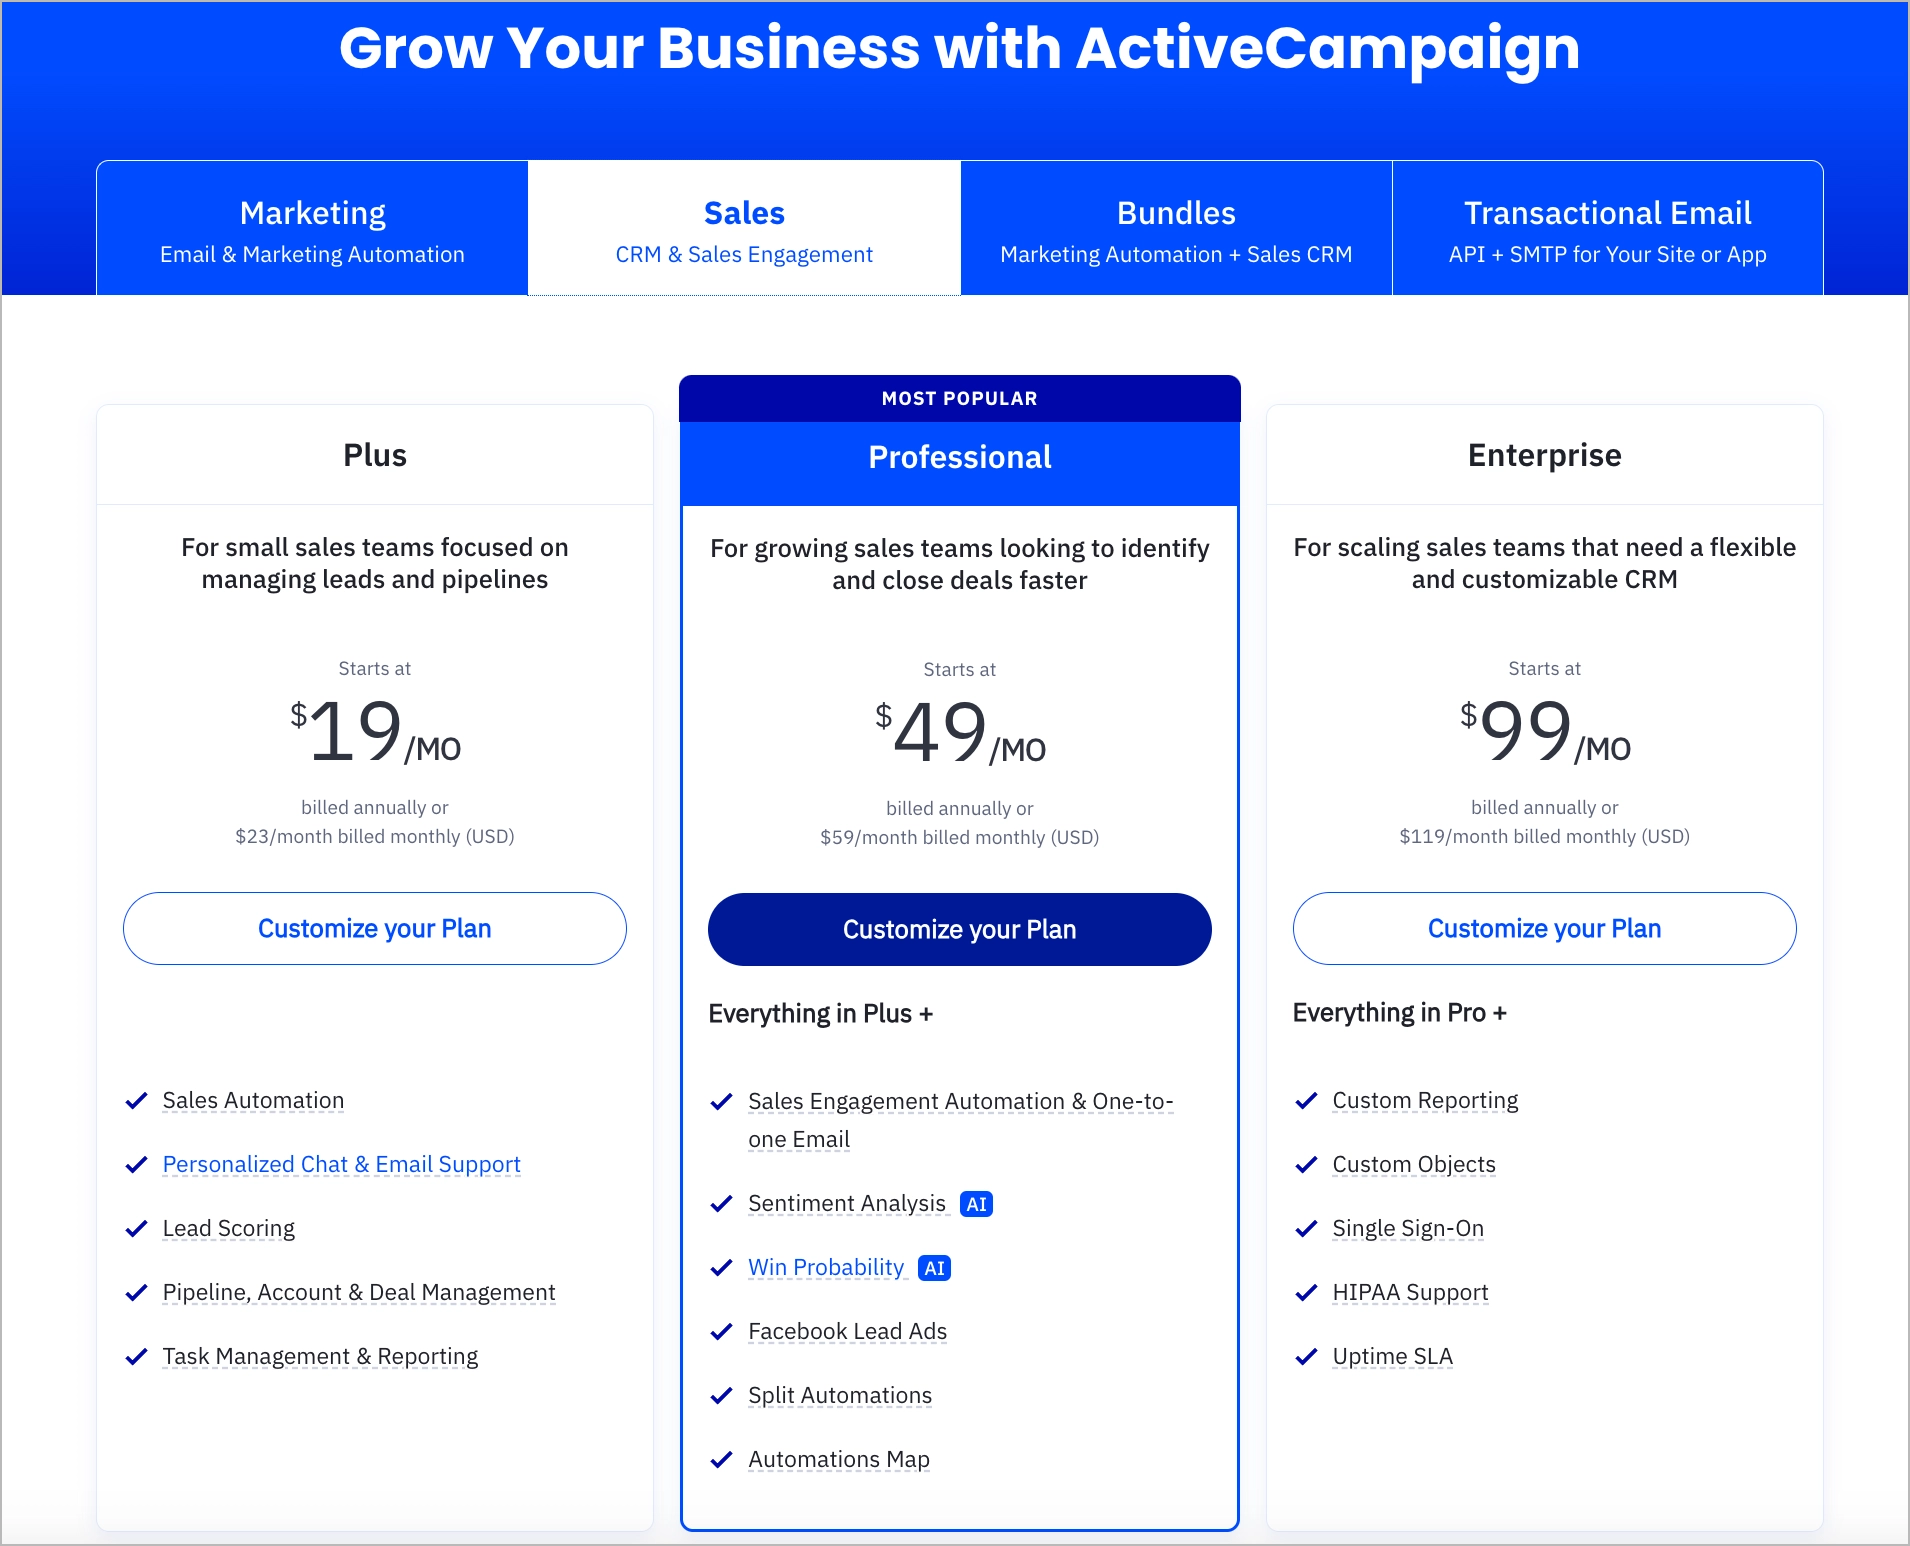 email marketing and automation features prices in ActiveCampaign